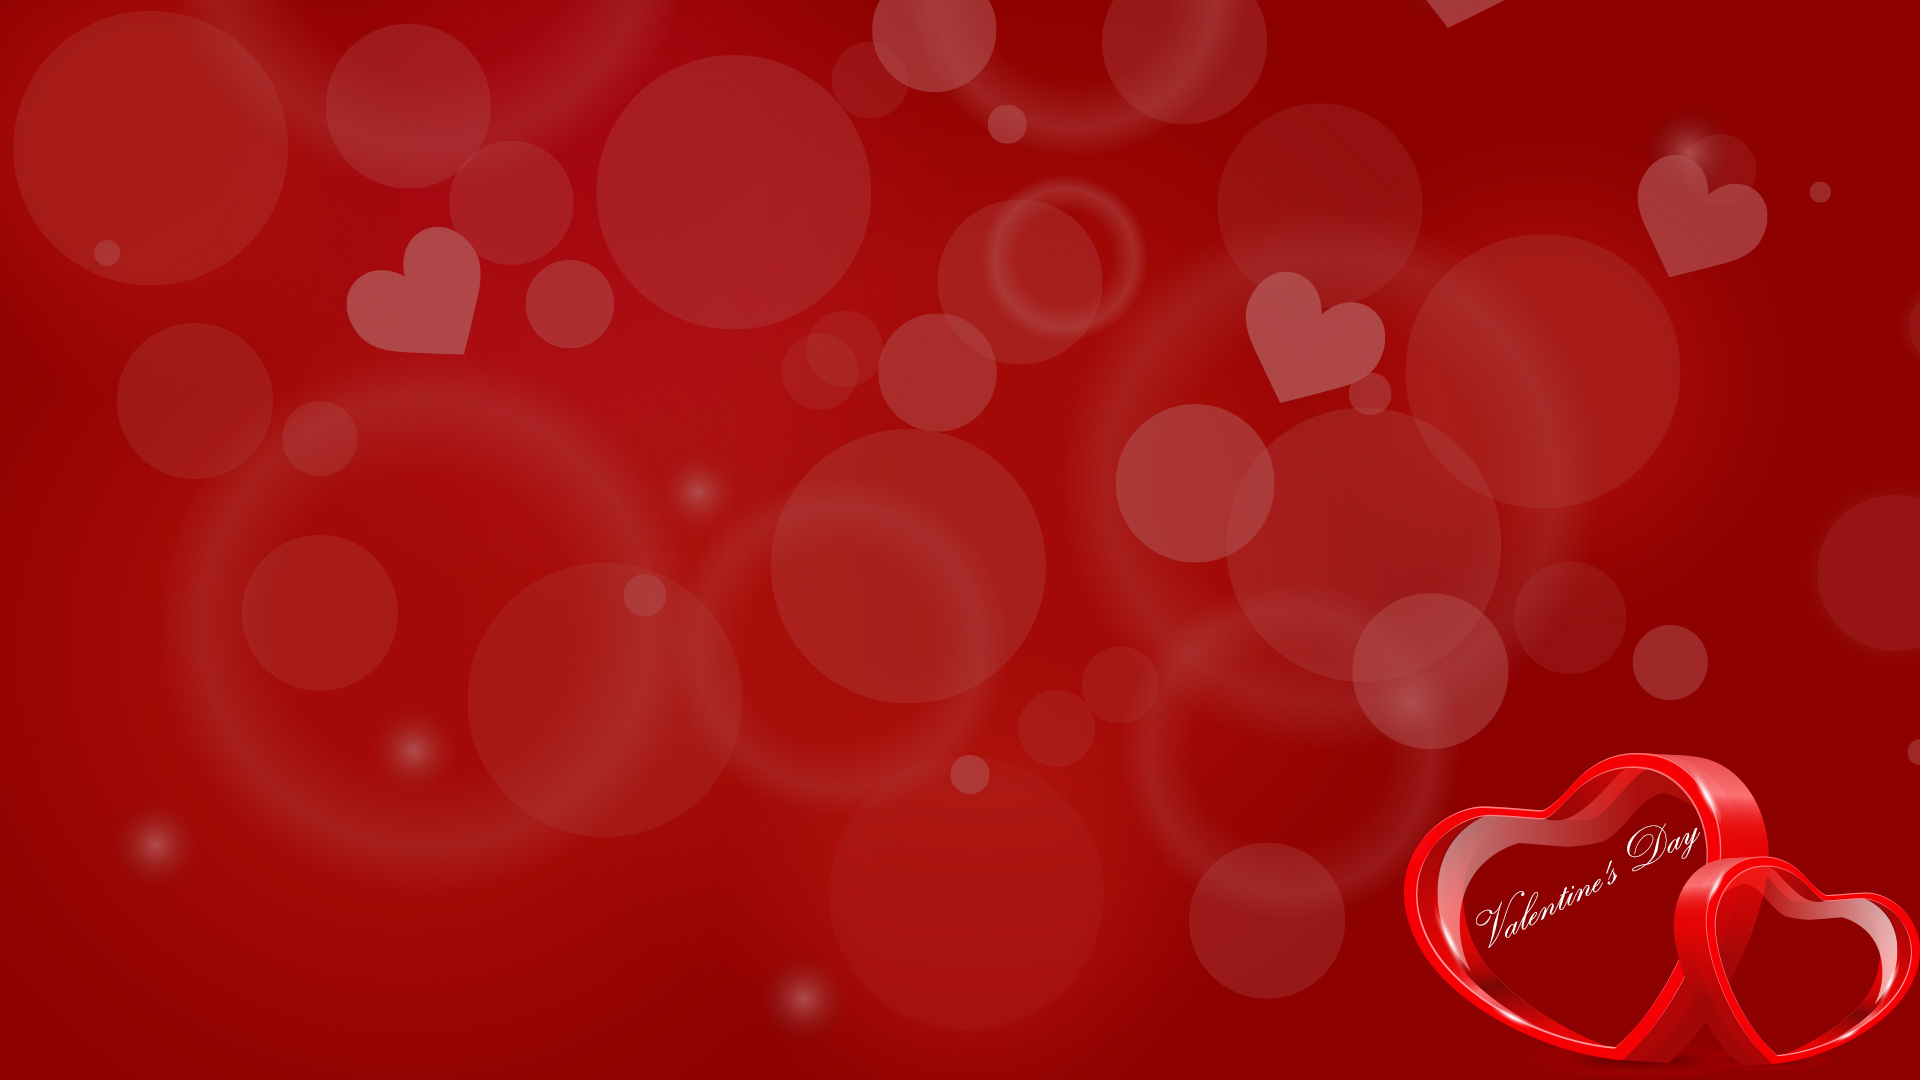 heart background for powerpoint presentation